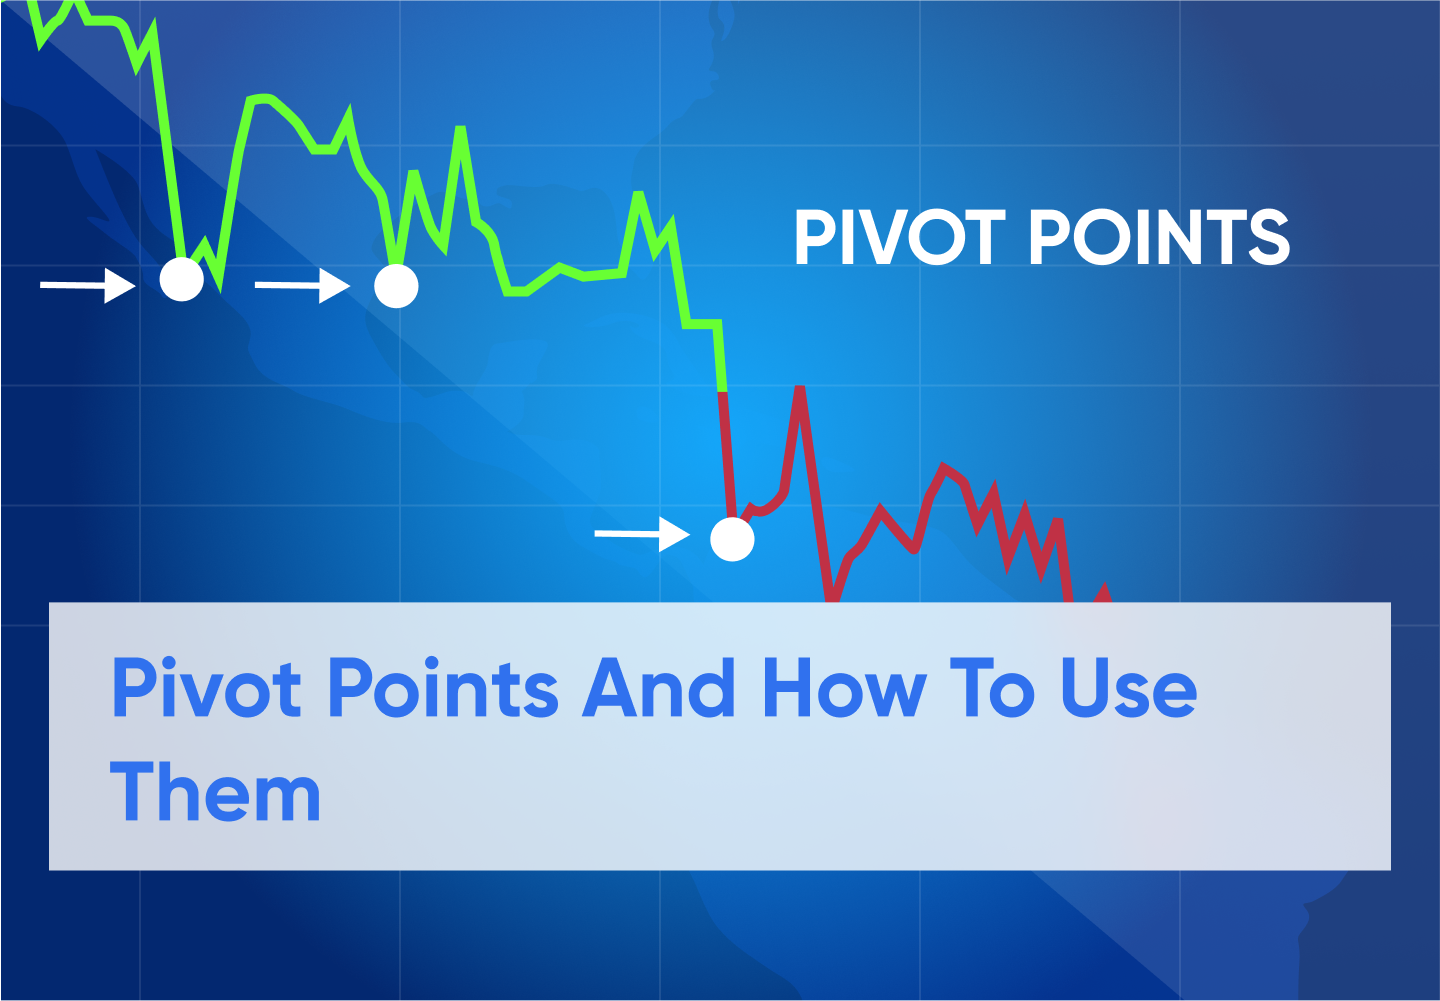 What is a Pivot Point?